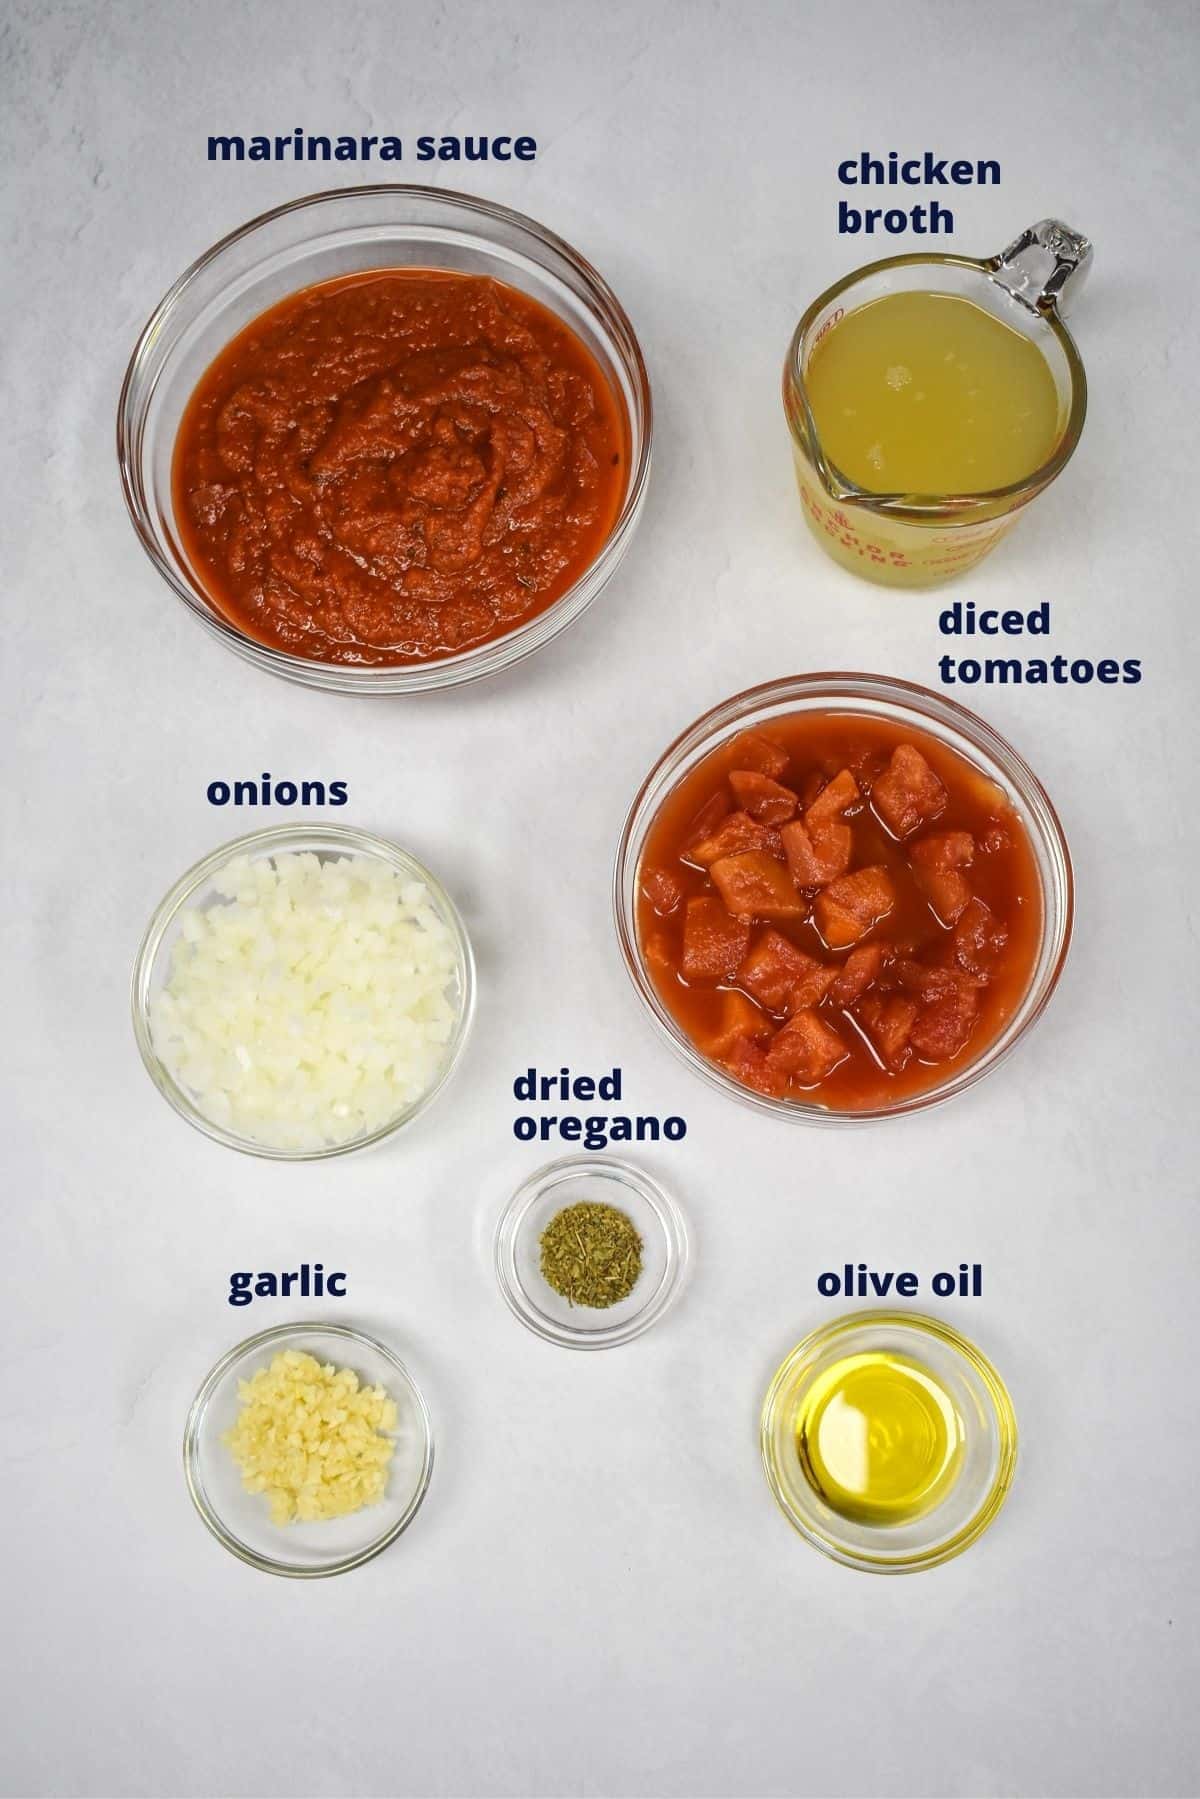 The ingredients for the sauce, prepped and arranged in glass bowls on a white table.